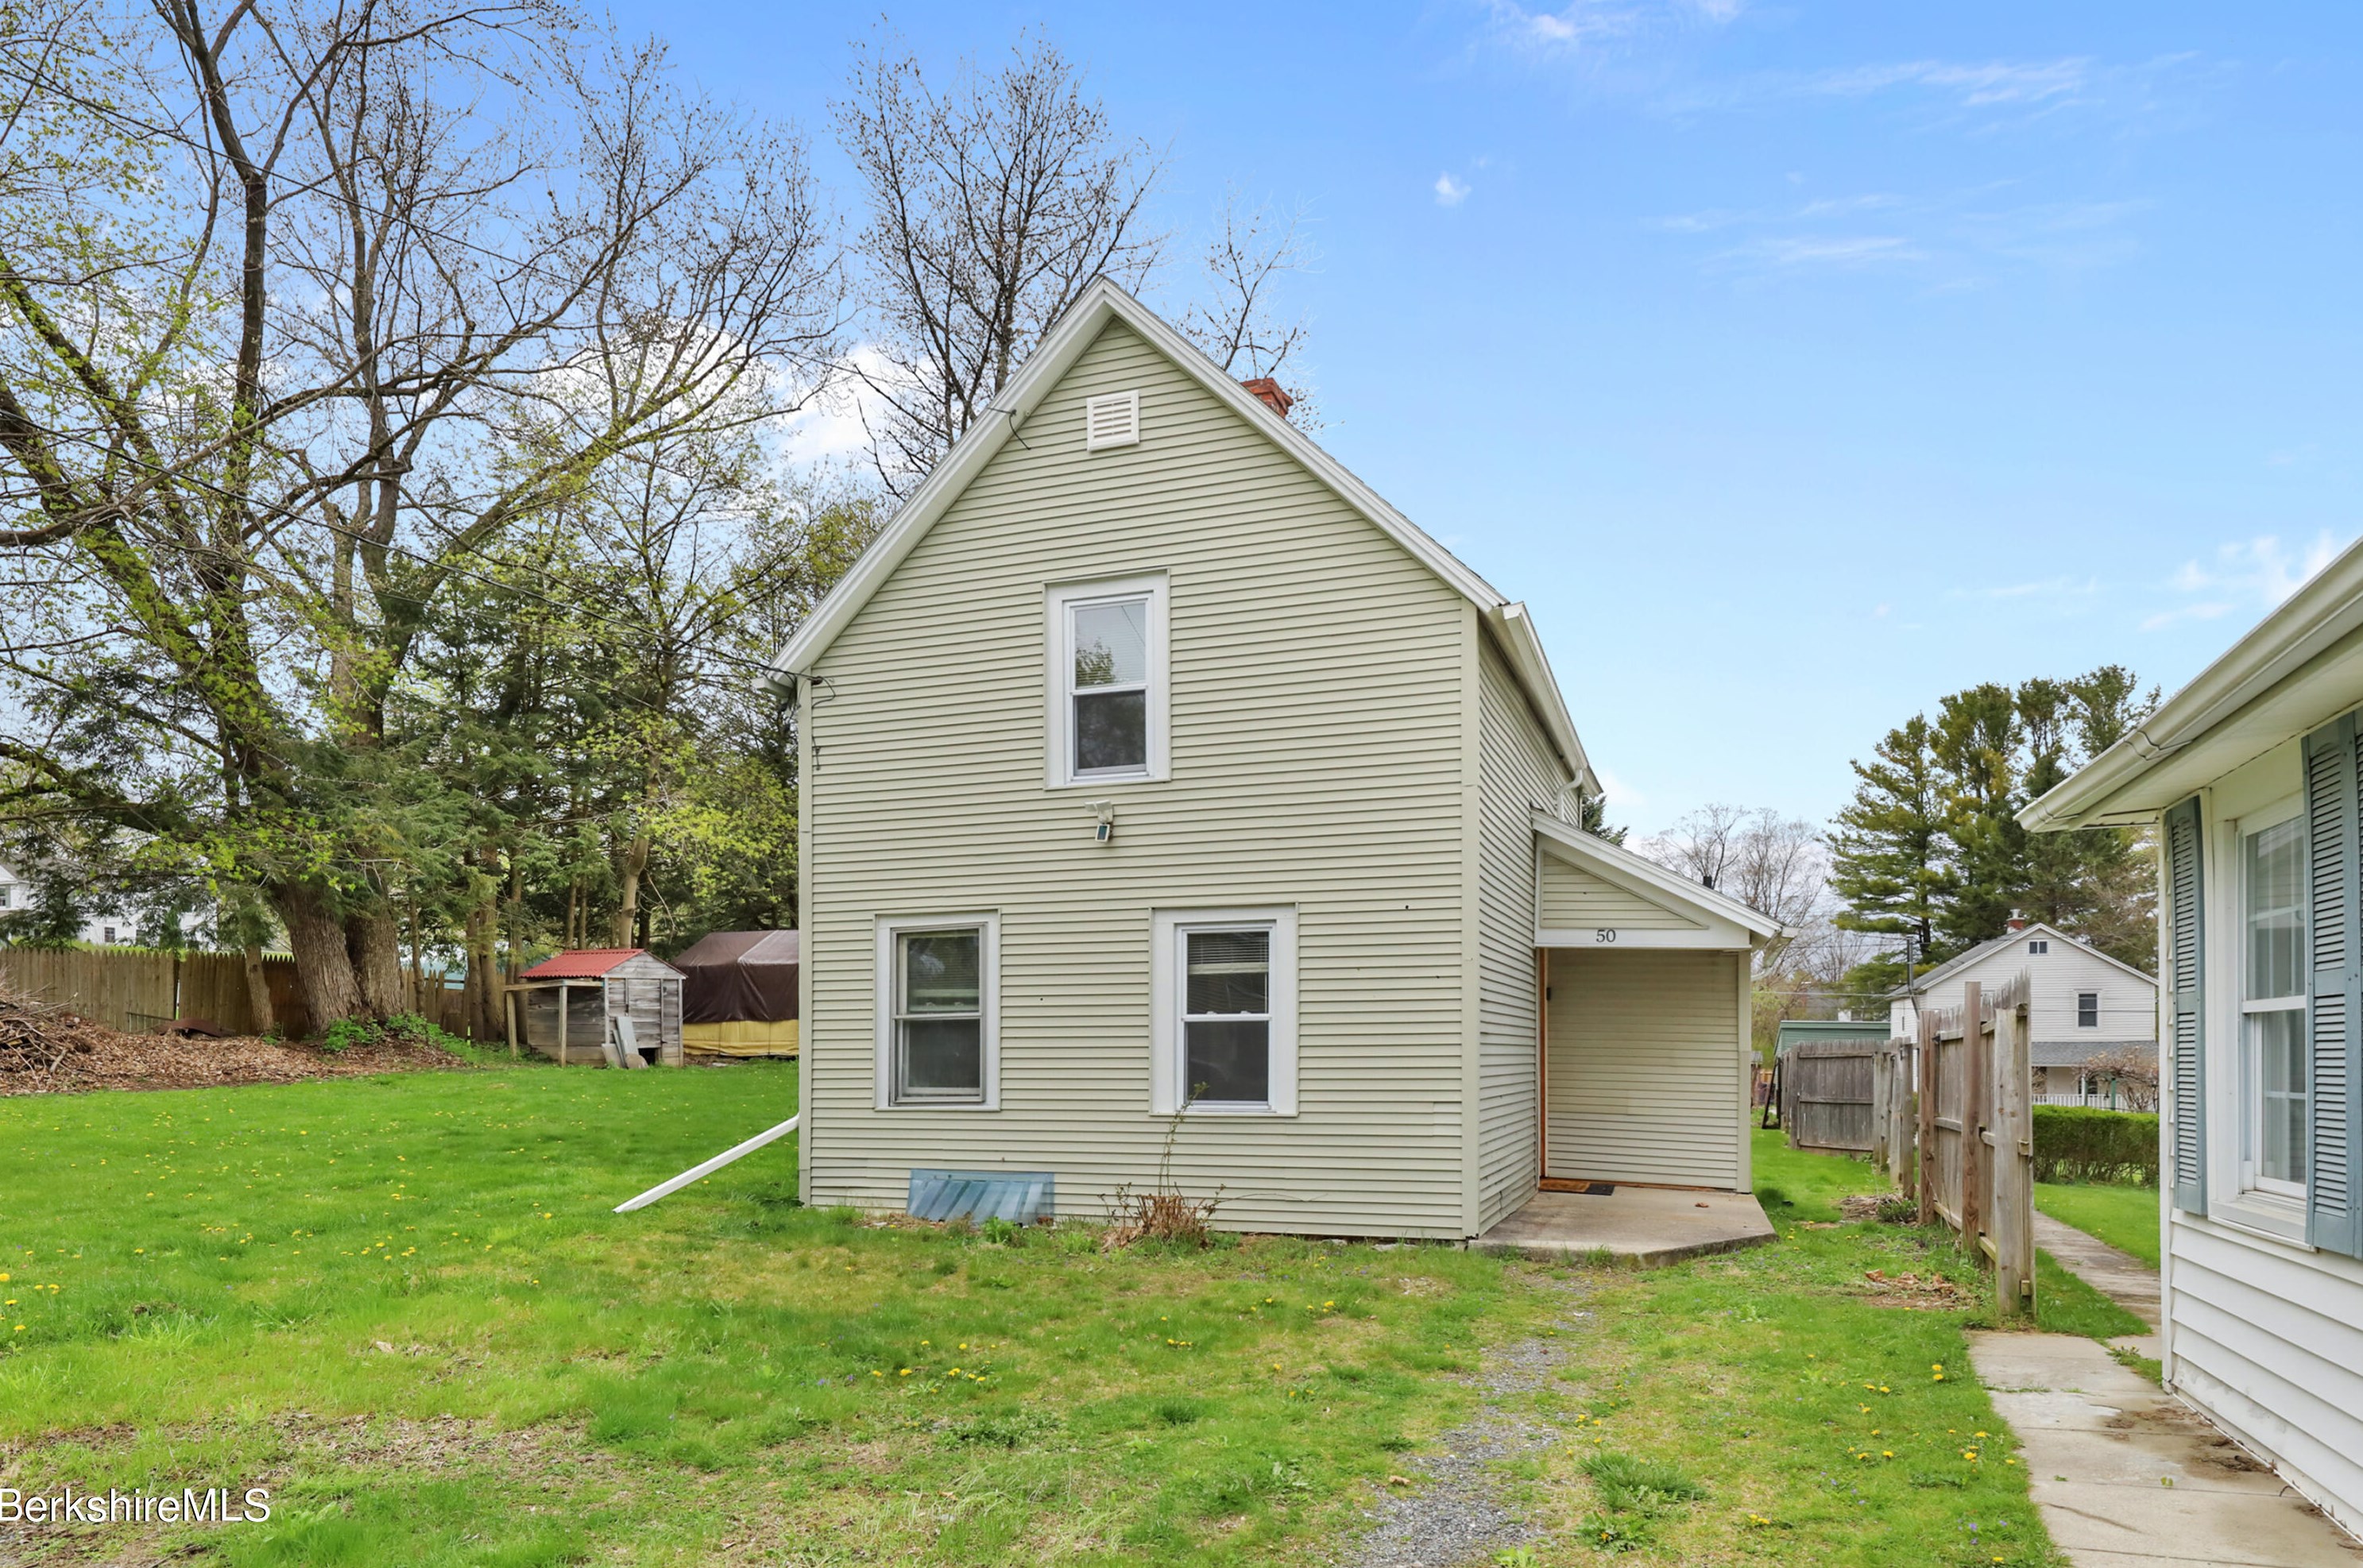 50 Margerie St, Lee, MA 01238 exterior